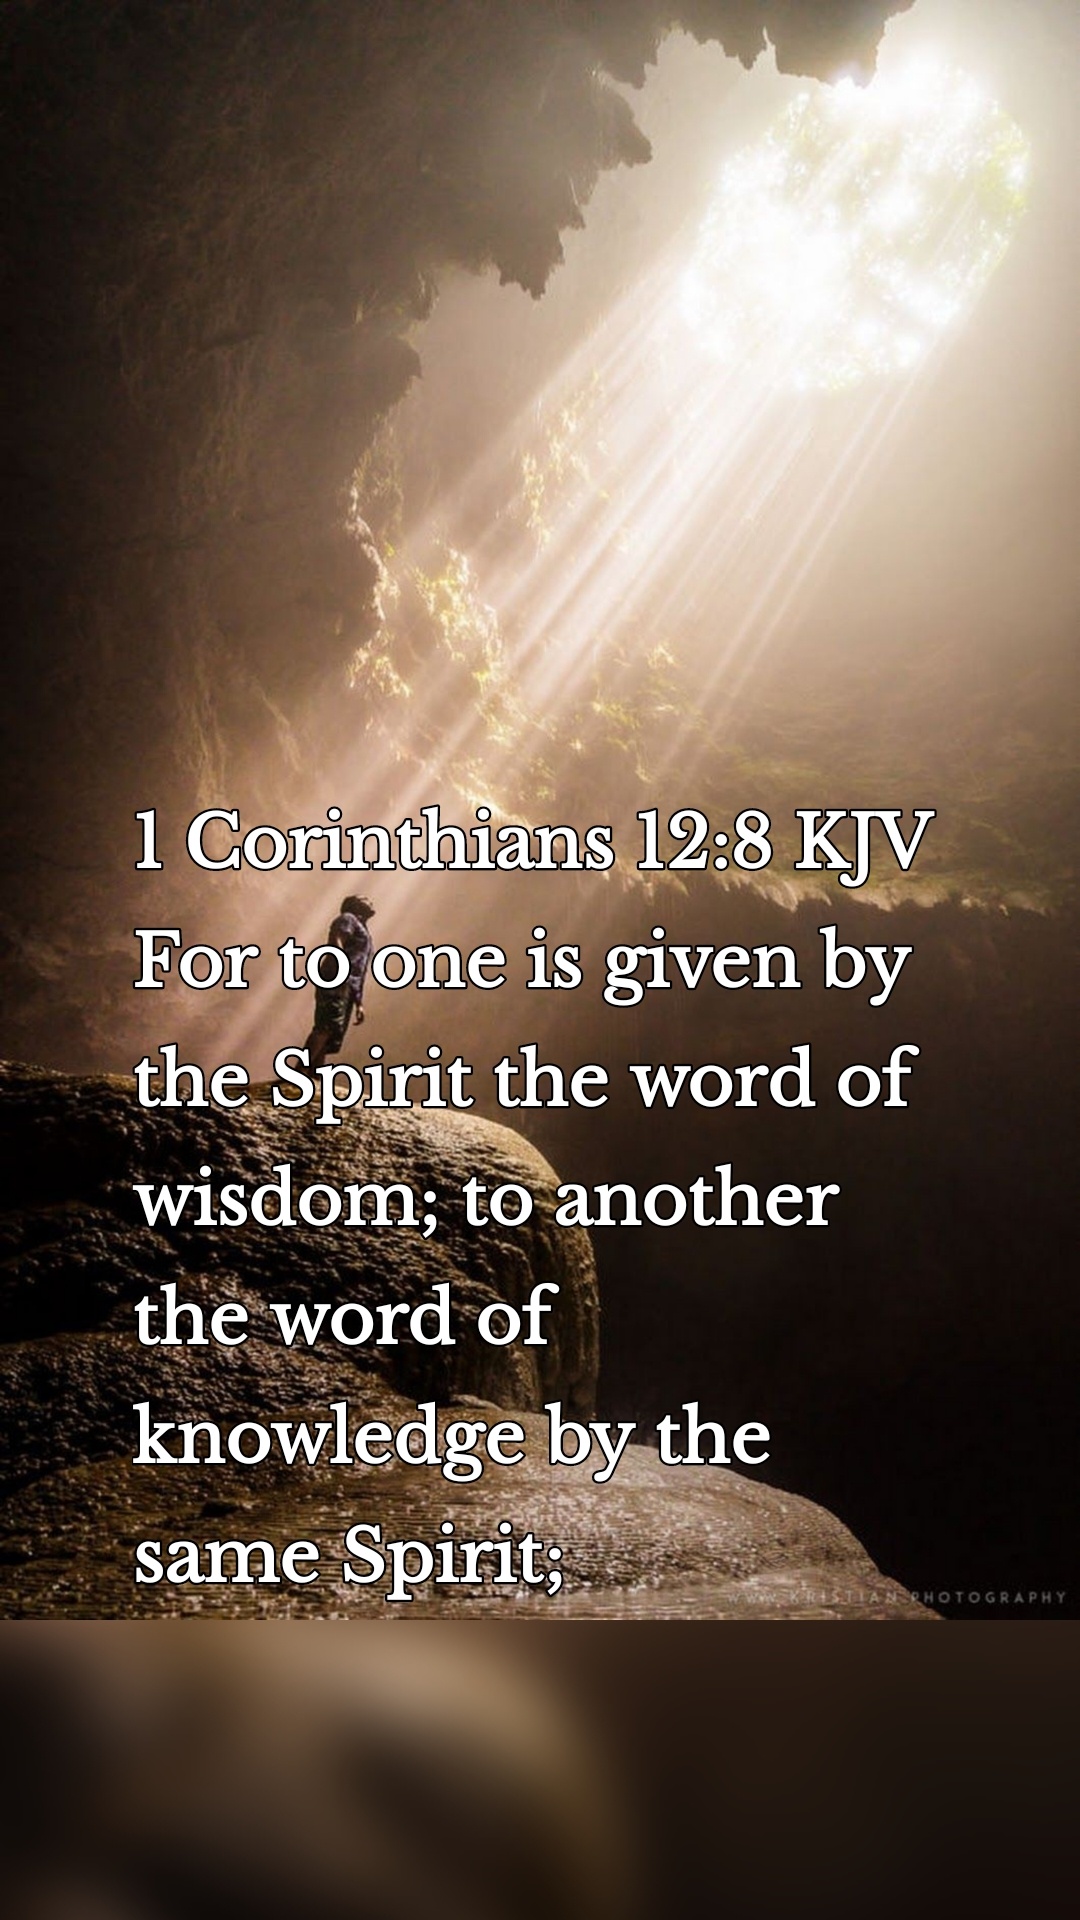 1 Corinthians 12:8 KJV For to one is given by the Spirit the word of wisdom; to another the word of knowledge by the same Spirit;